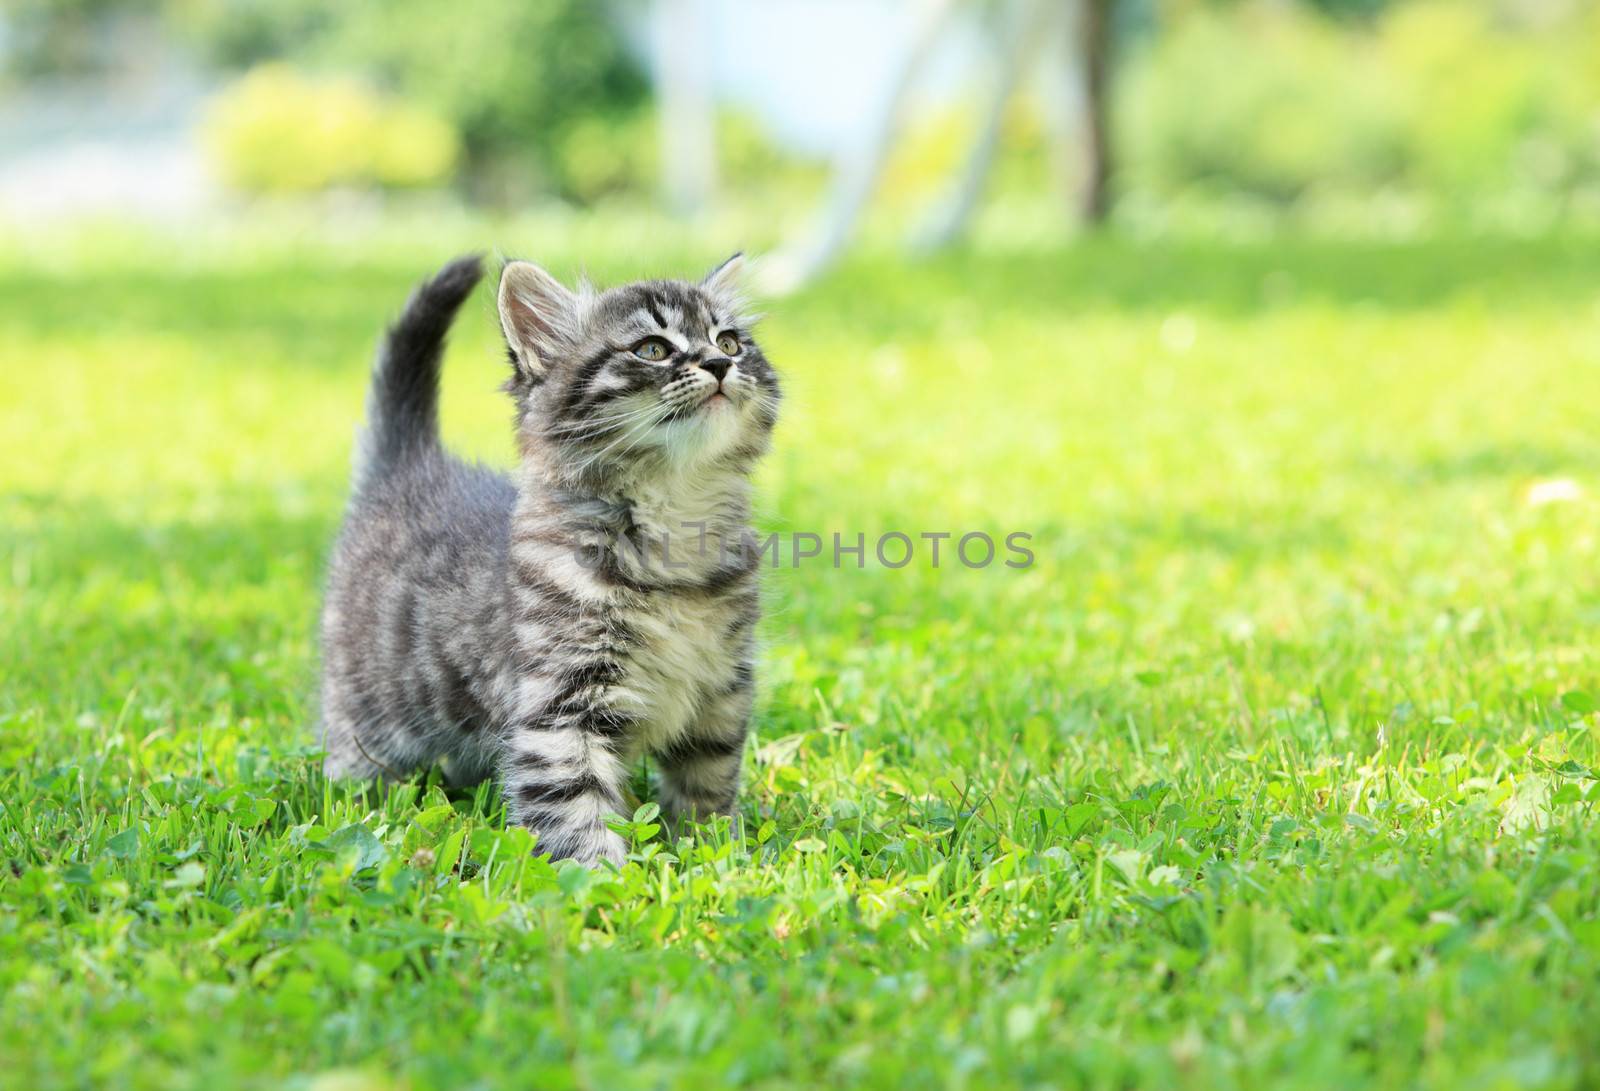 Cute little cat on the grass looking up